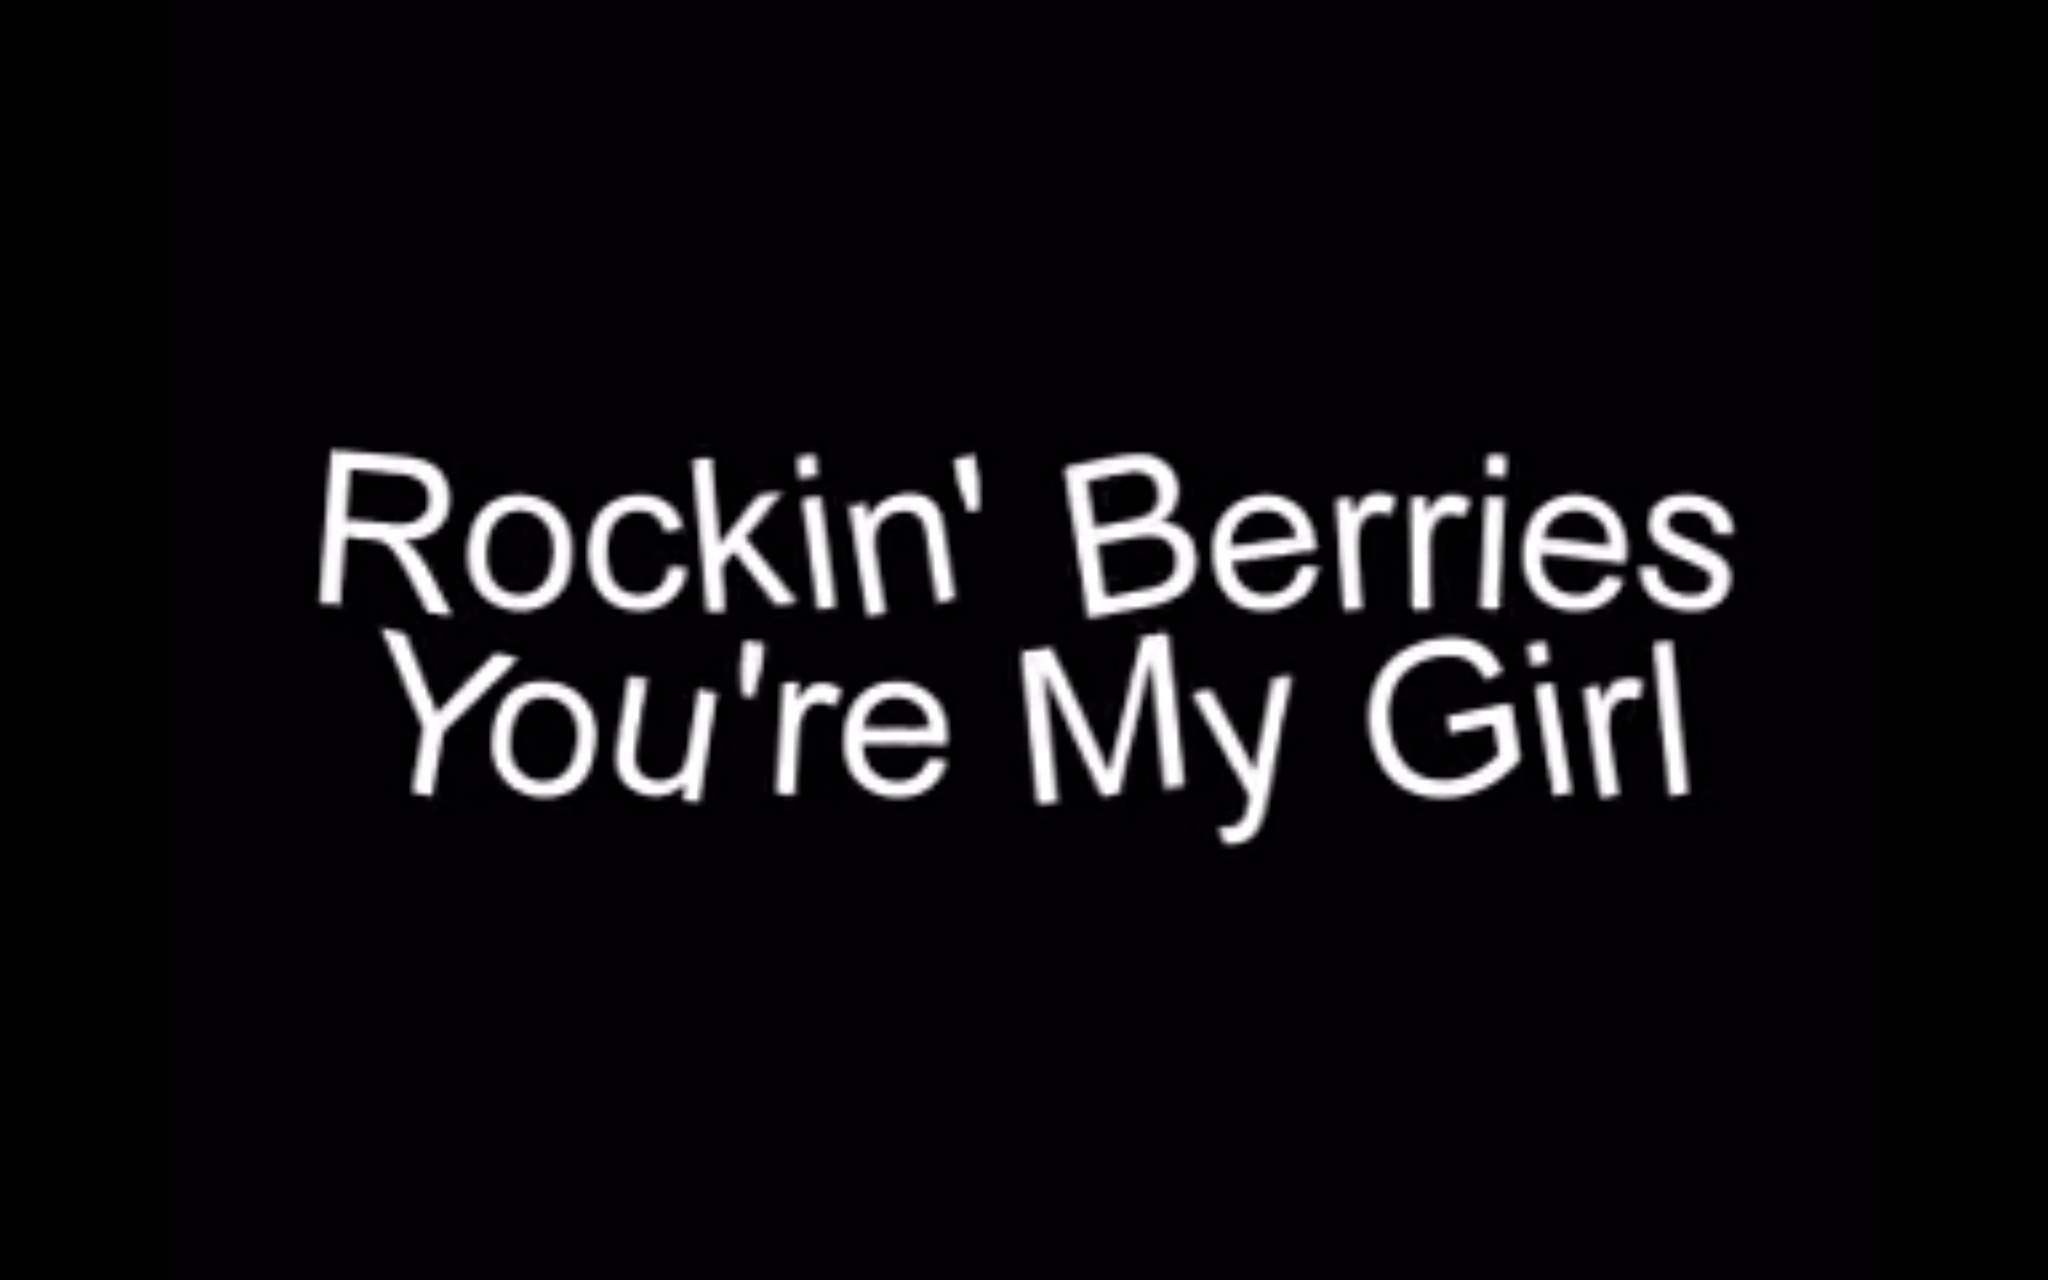 Song lyrics to You're My Girl, as performed by the Rockin' Berries